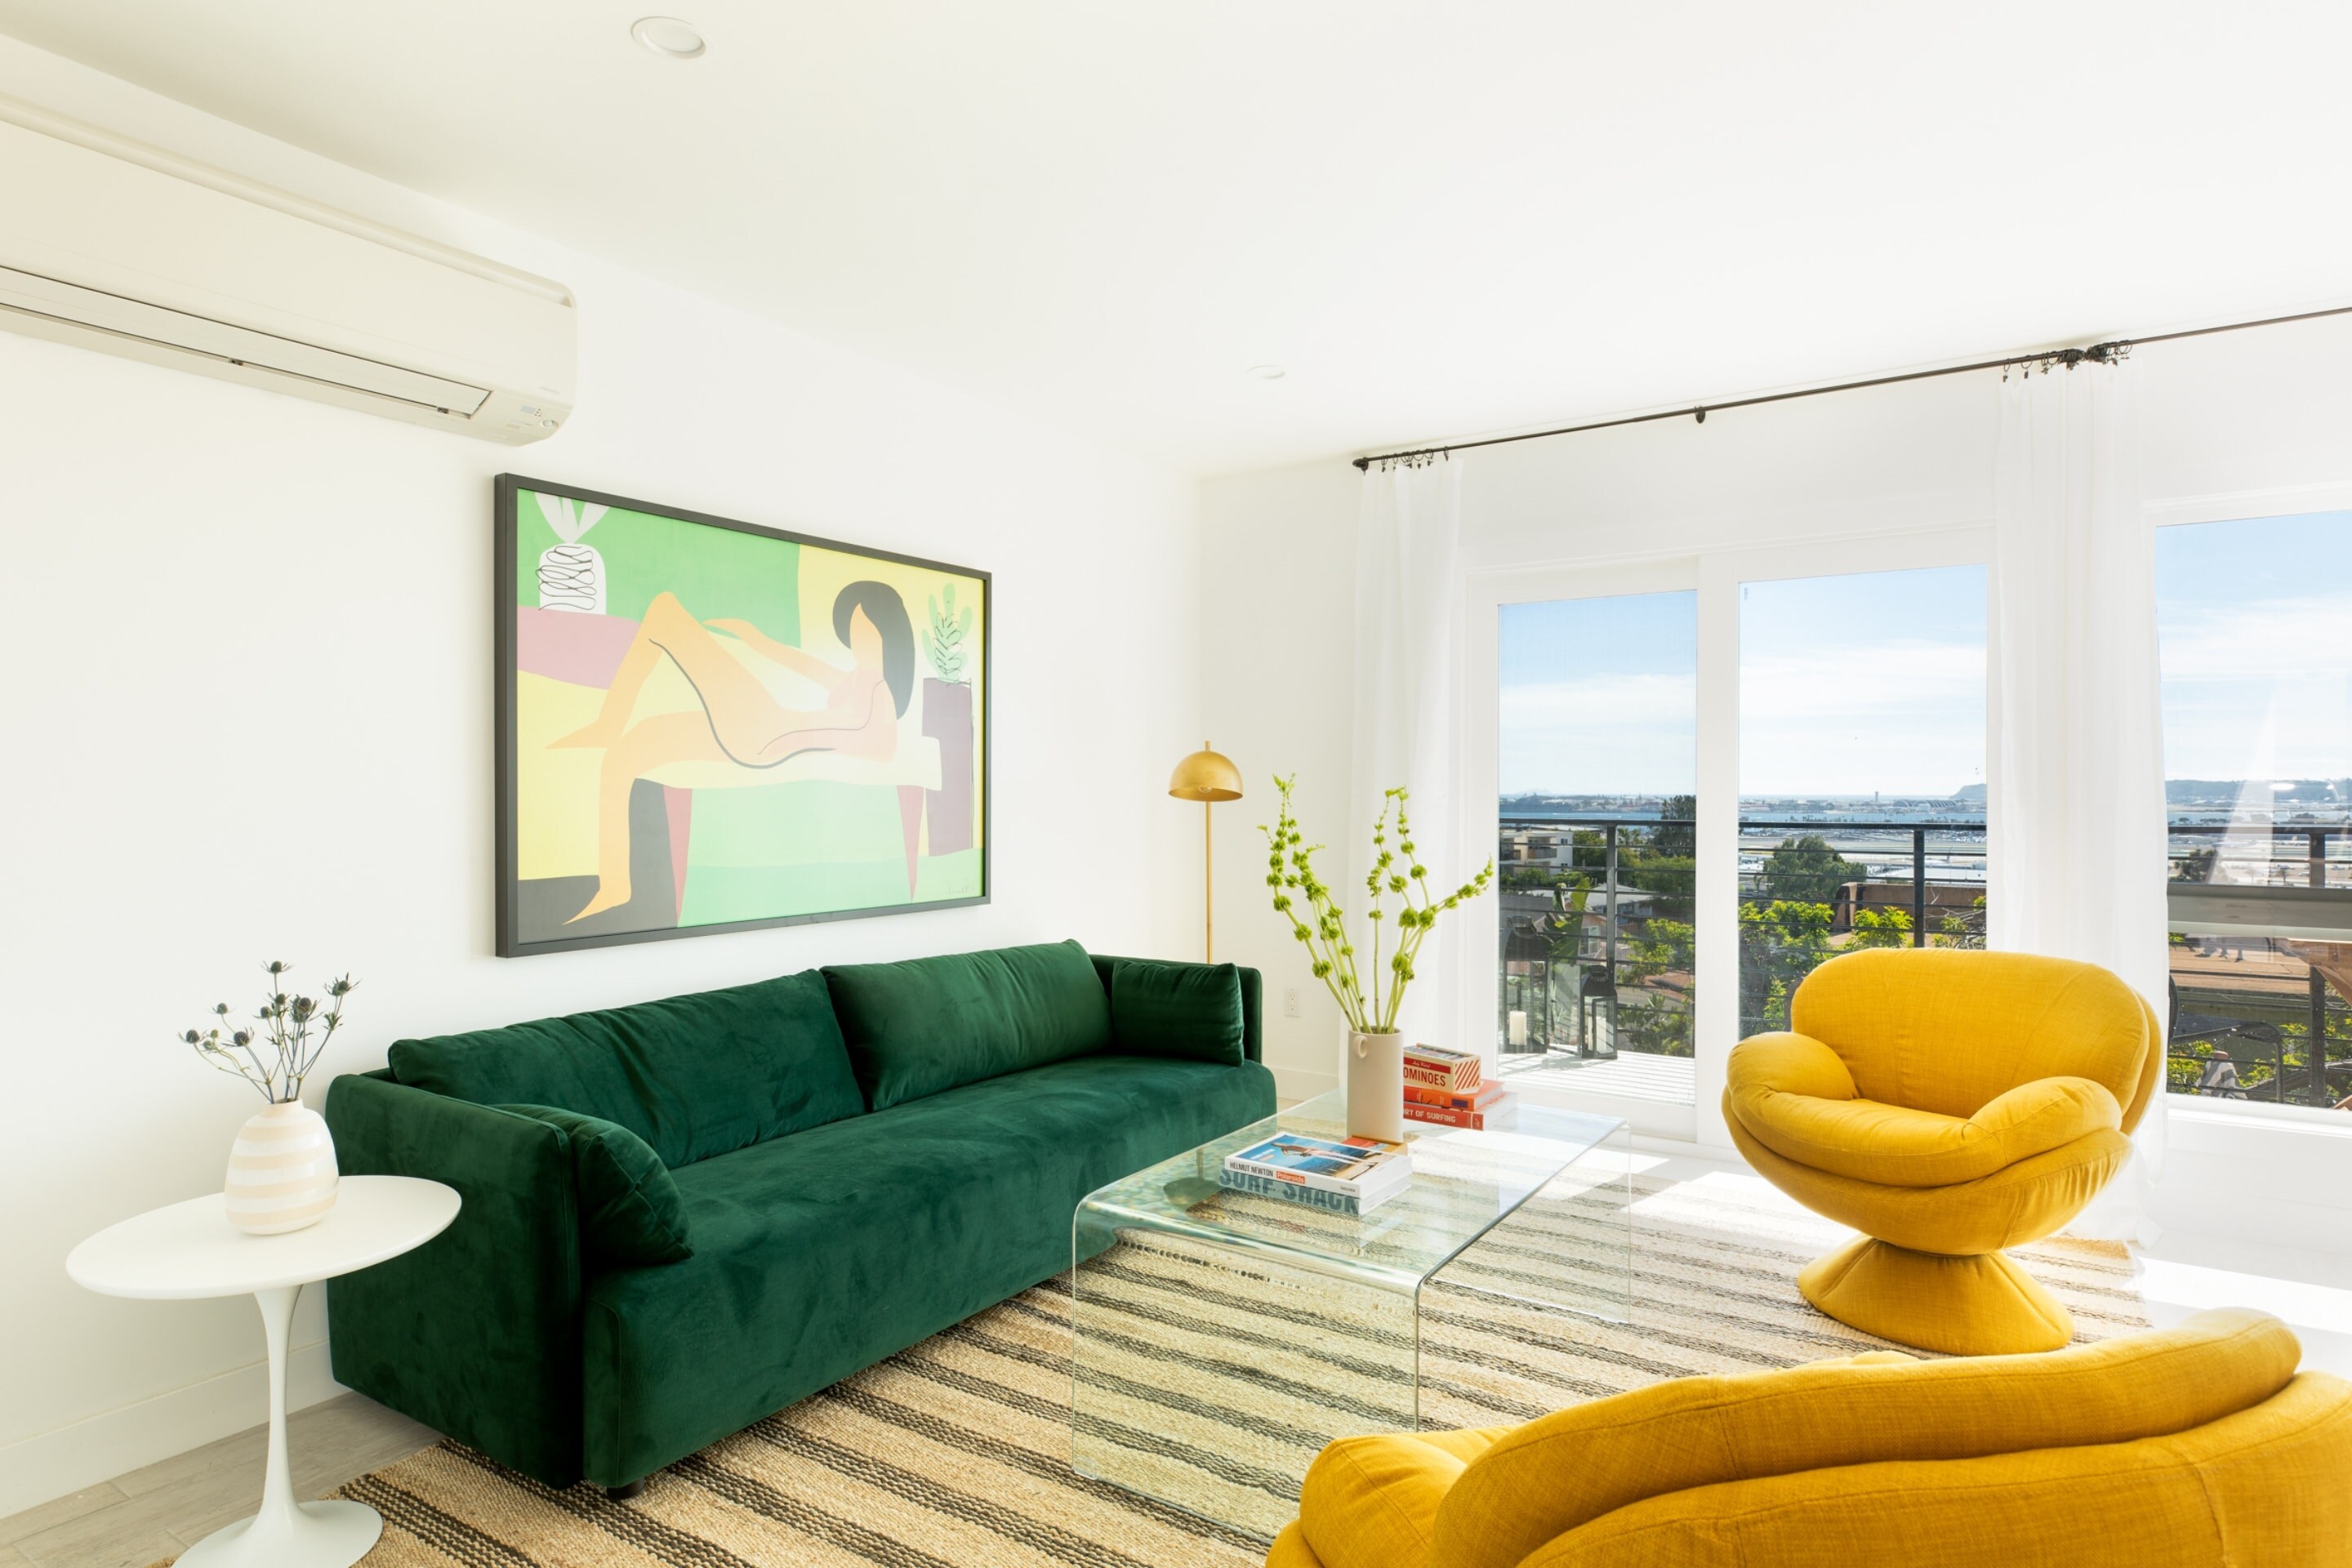 Unit 2 (upstairs) - Living room has direct access to outdoor balcony.